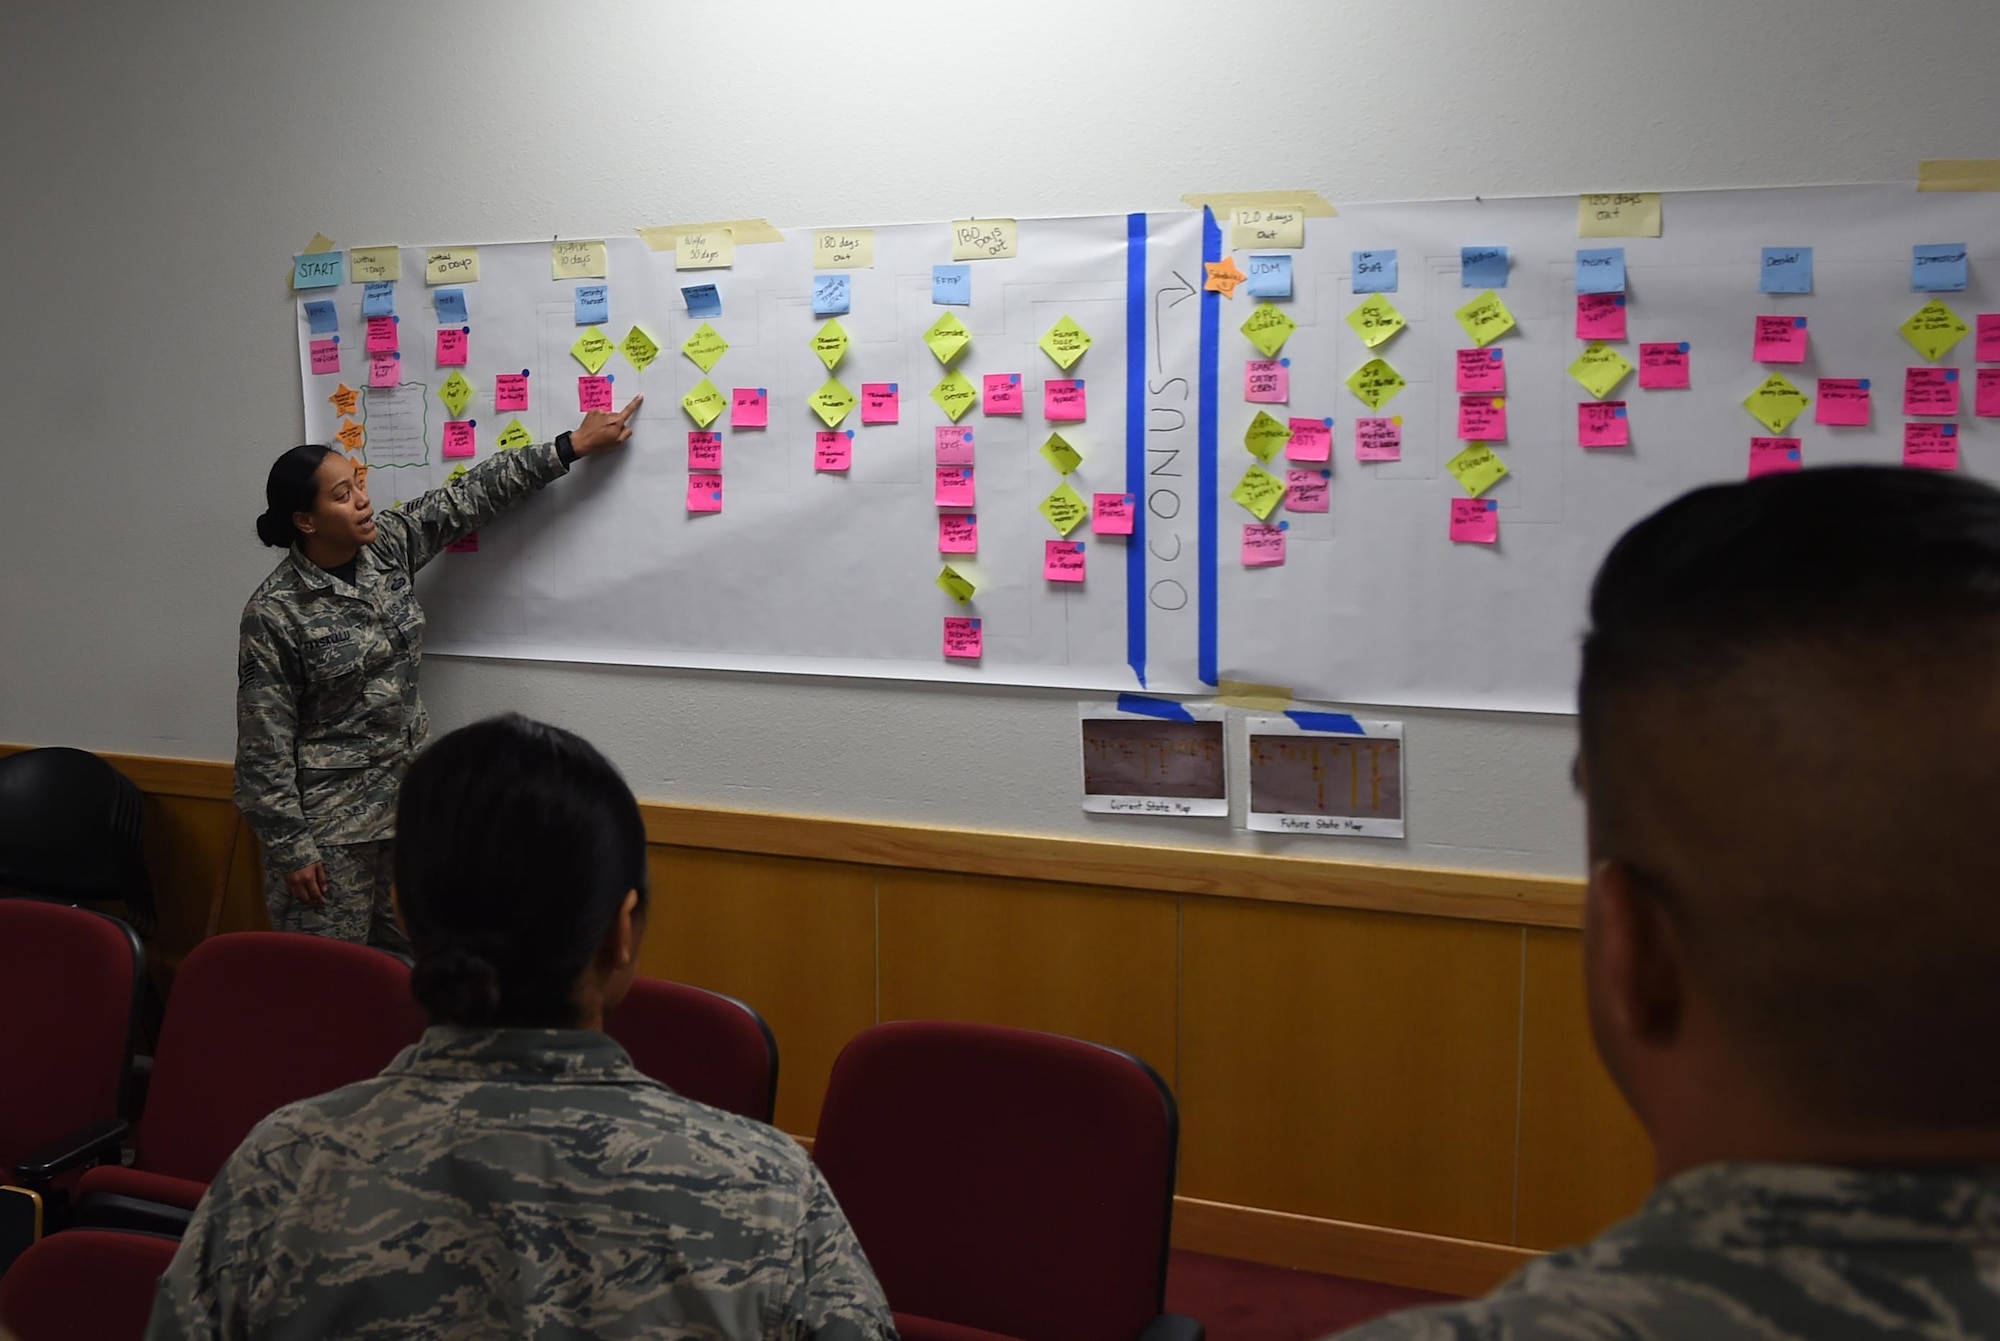 U.S. Air Force Staff Sgt. Desirae Faasavalu, 7th Force Support Squadron, career development supervisor, explains the improved outbound assignments process May 31, 2017, at Dyess Air Force Base, Texas. The updates to the manpower section of 7FSS is a part of the Continuous Process Improvement program being implemented at Dyess and across Air Force Global Strike Command as a whole. (U.S. Air Force photo by Senior Airman Alexander Guerrero)